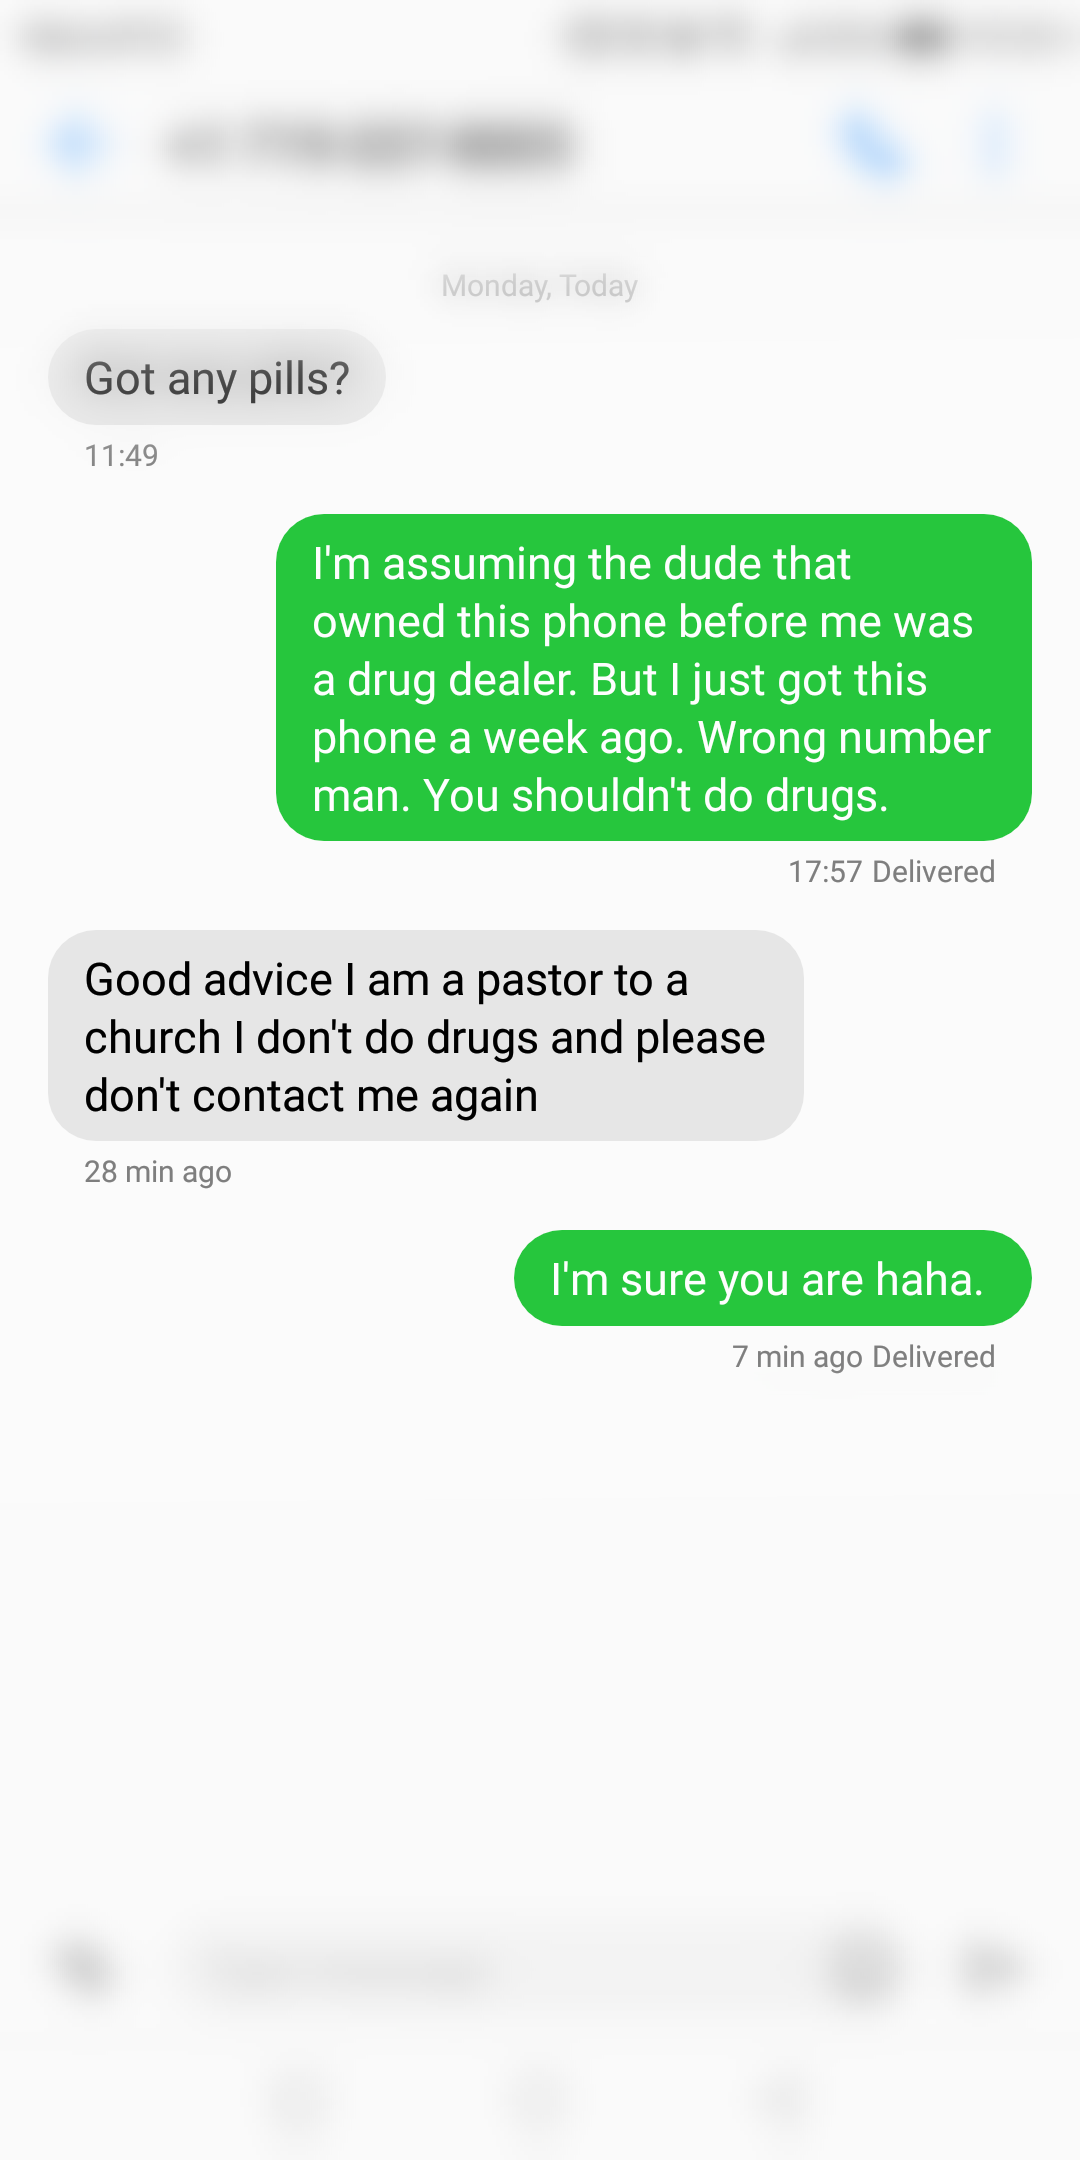 diagram - Monday, Today Got any pills? I'm assuming the dude that owned this phone before me was a drug dealer. But I just got this phone a week ago. Wrong number man. You shouldn't do drugs. Delivered Good advice I am a pastor to a church I don't do drug